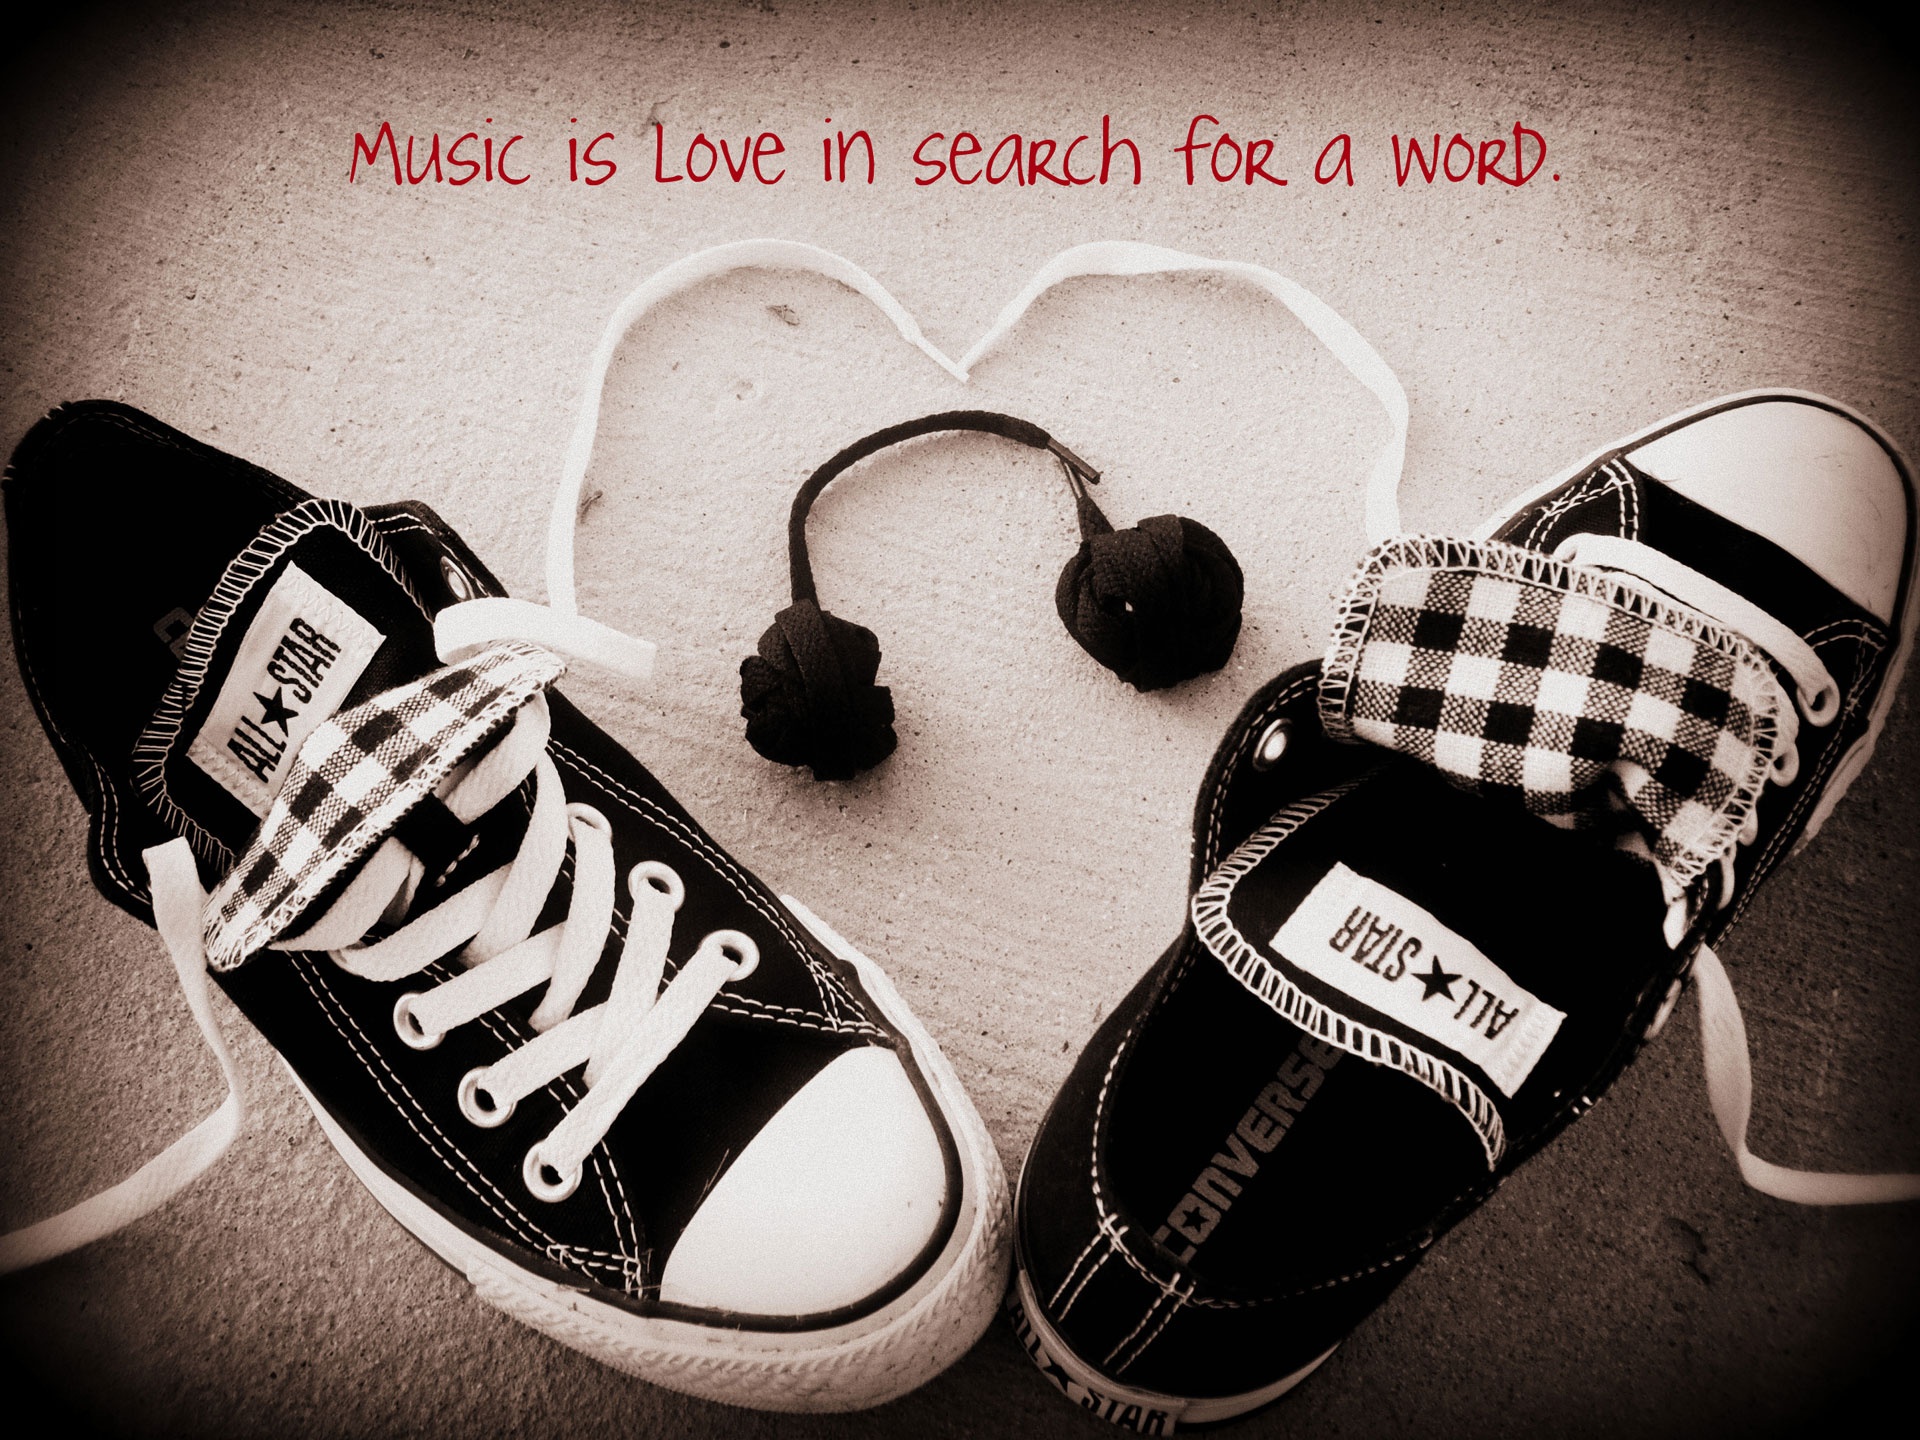 1920x1440 Music Is Love wallpaper, music and dance wallpapers